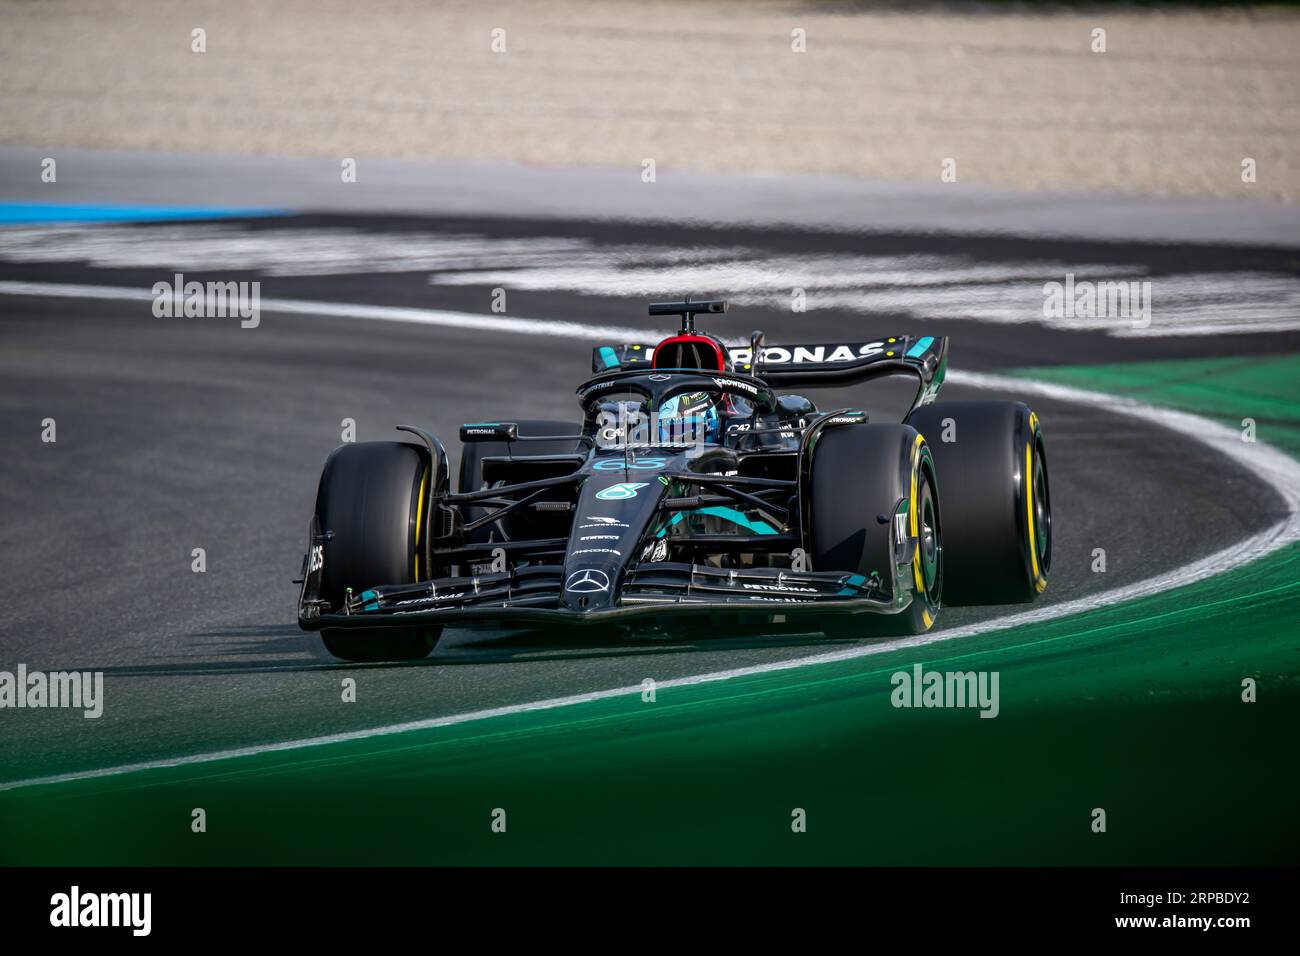 MONZA CIRCUIT, ITALY - SEPTEMBER 01: George Russell, Mercedes F1 F1 W14 during the Italian Grand Prix at Monza Circuit on Friday September 01, 2023 in Monza, Italy. (Photo by Michael Potts/BSR Agency) Stock Photo